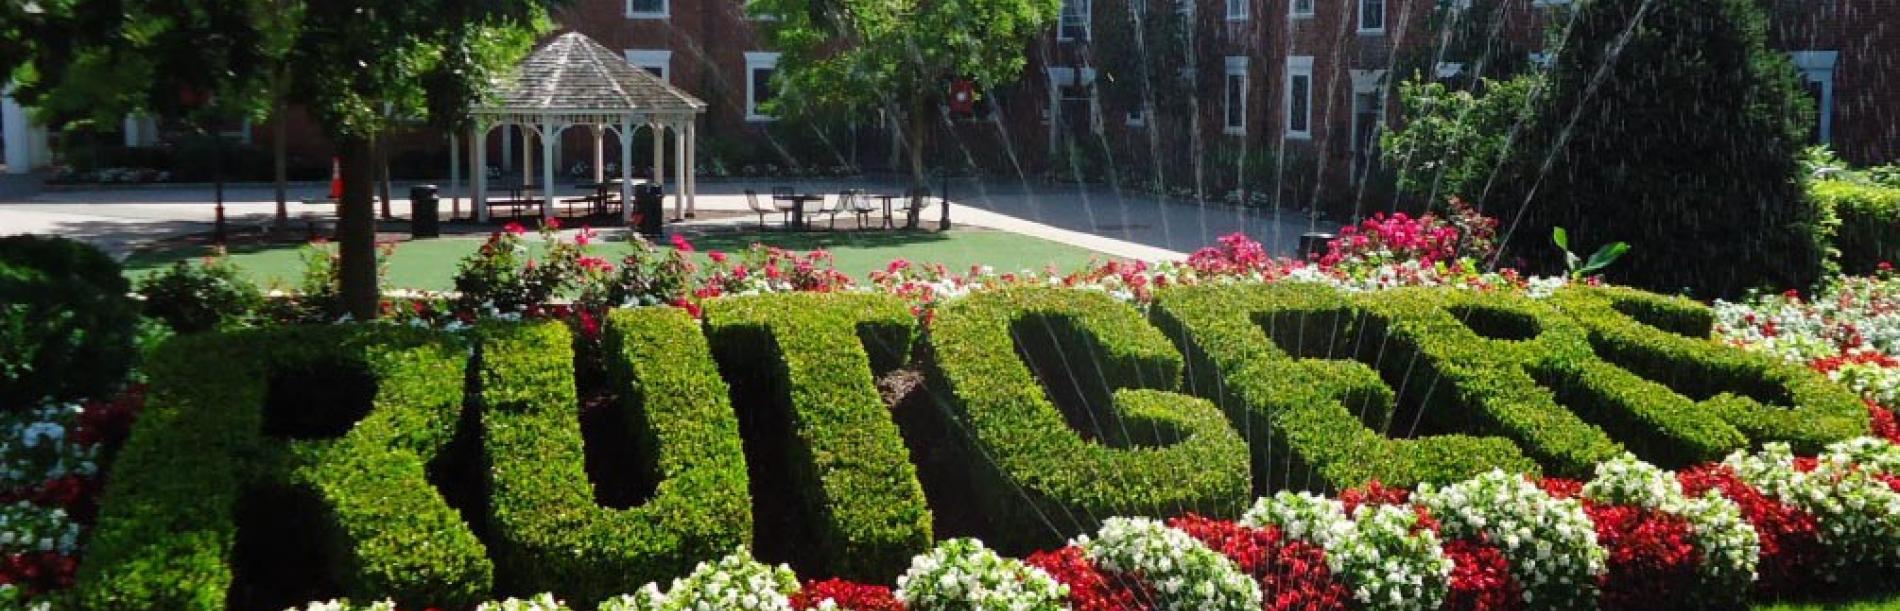 Rutgers letters carved out of bushes